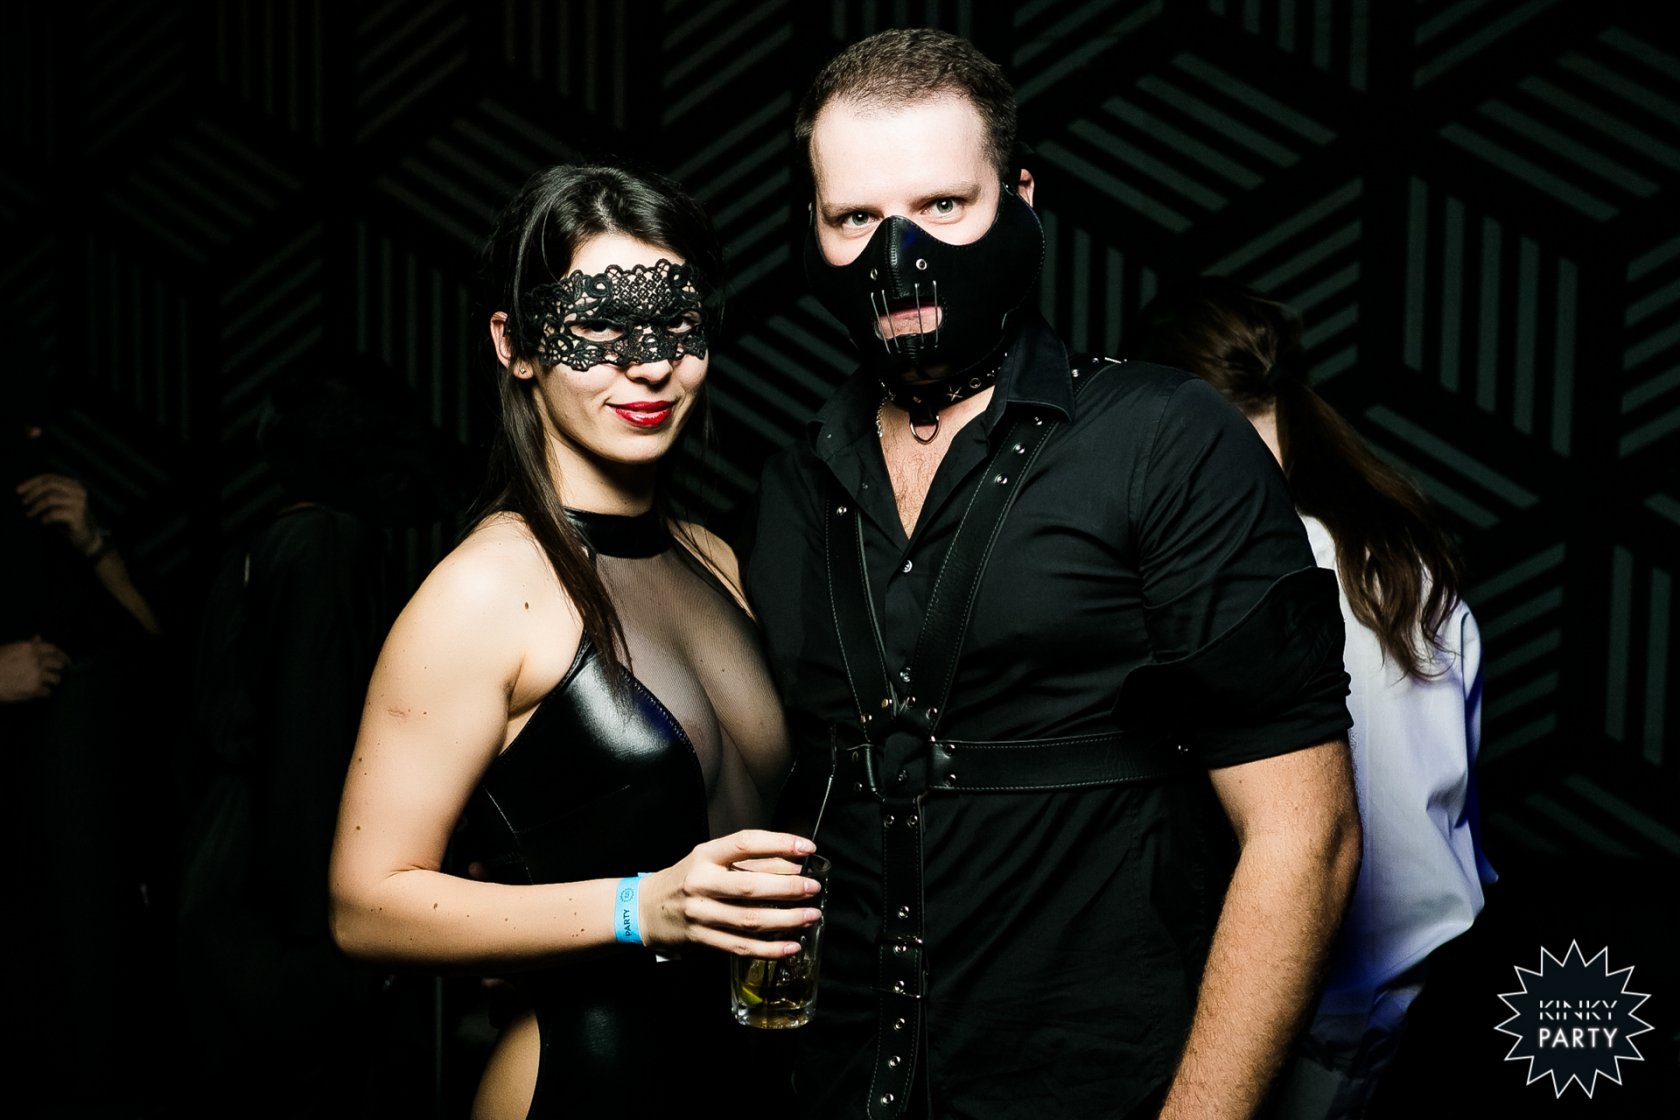 Indian Masked Swingers Party